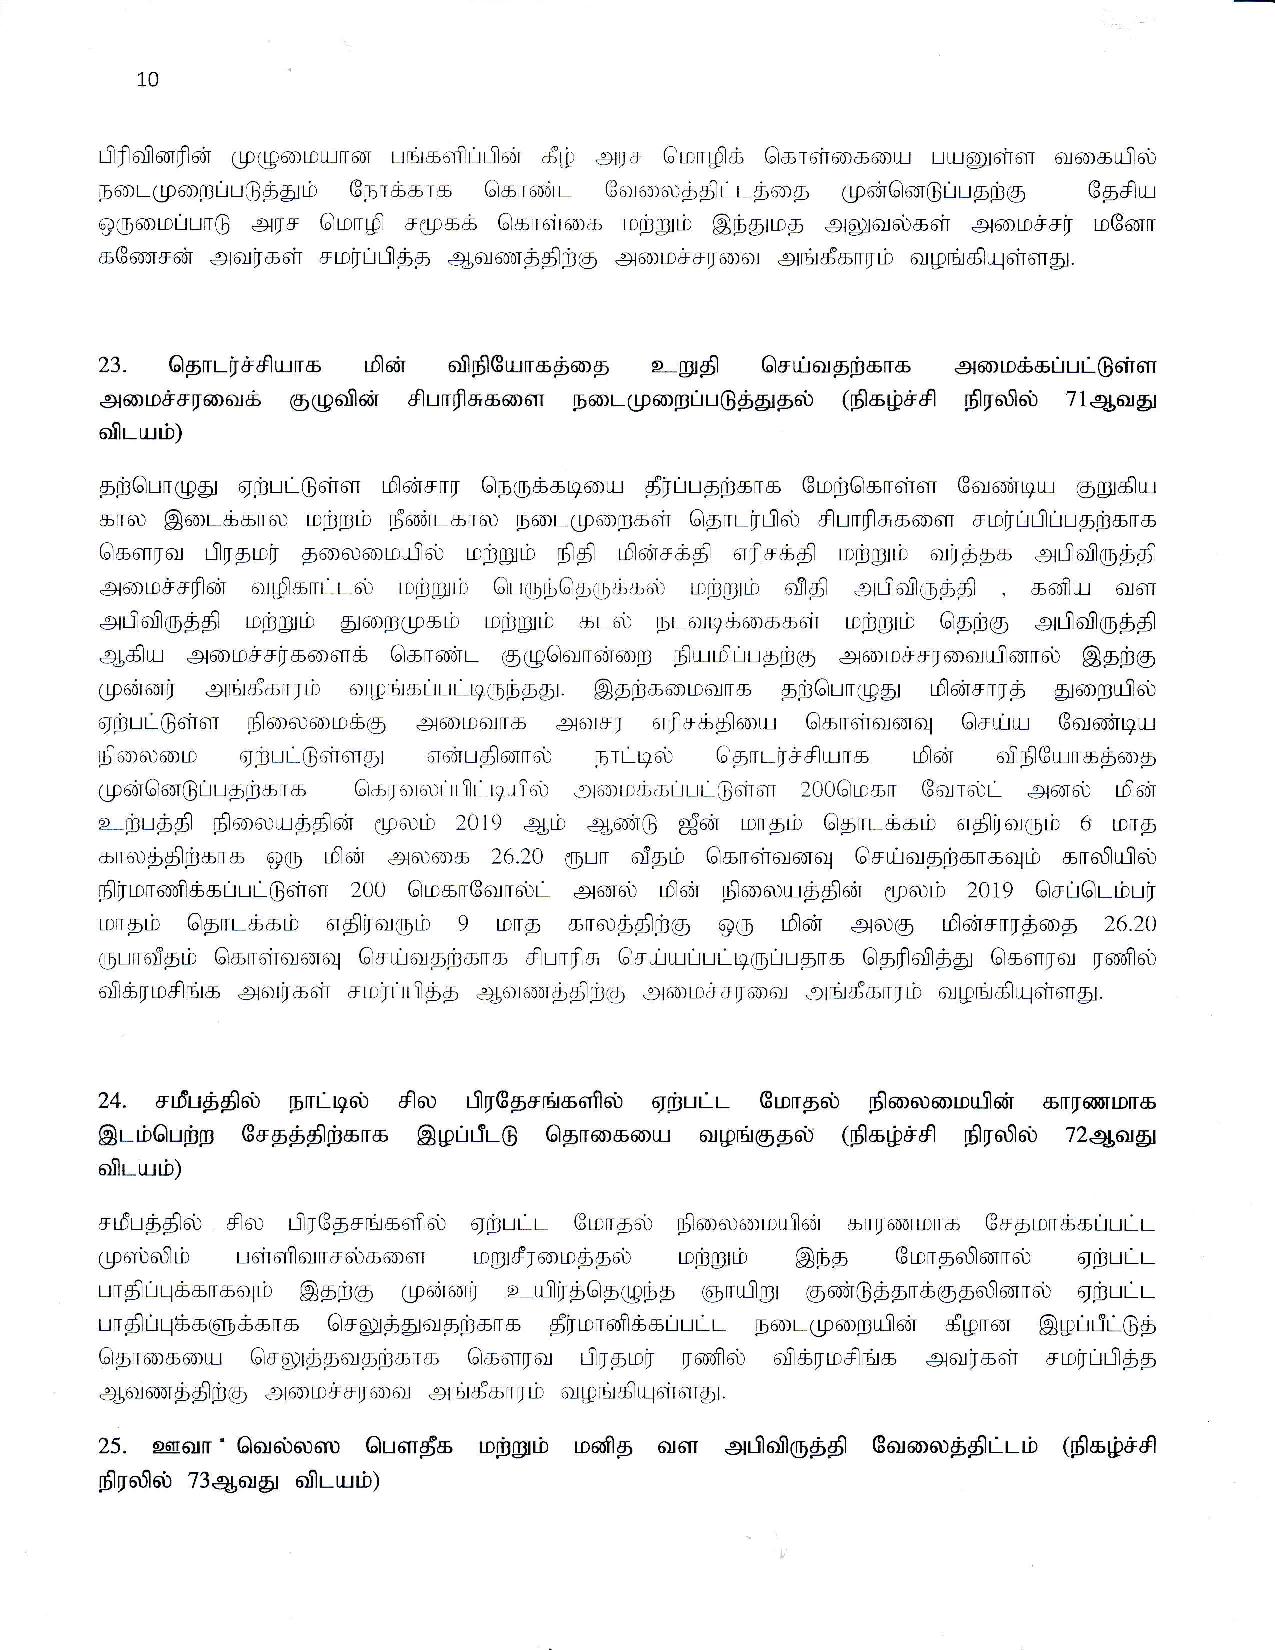 Cabinet Decision on 21.05.2019 Tamil page 011